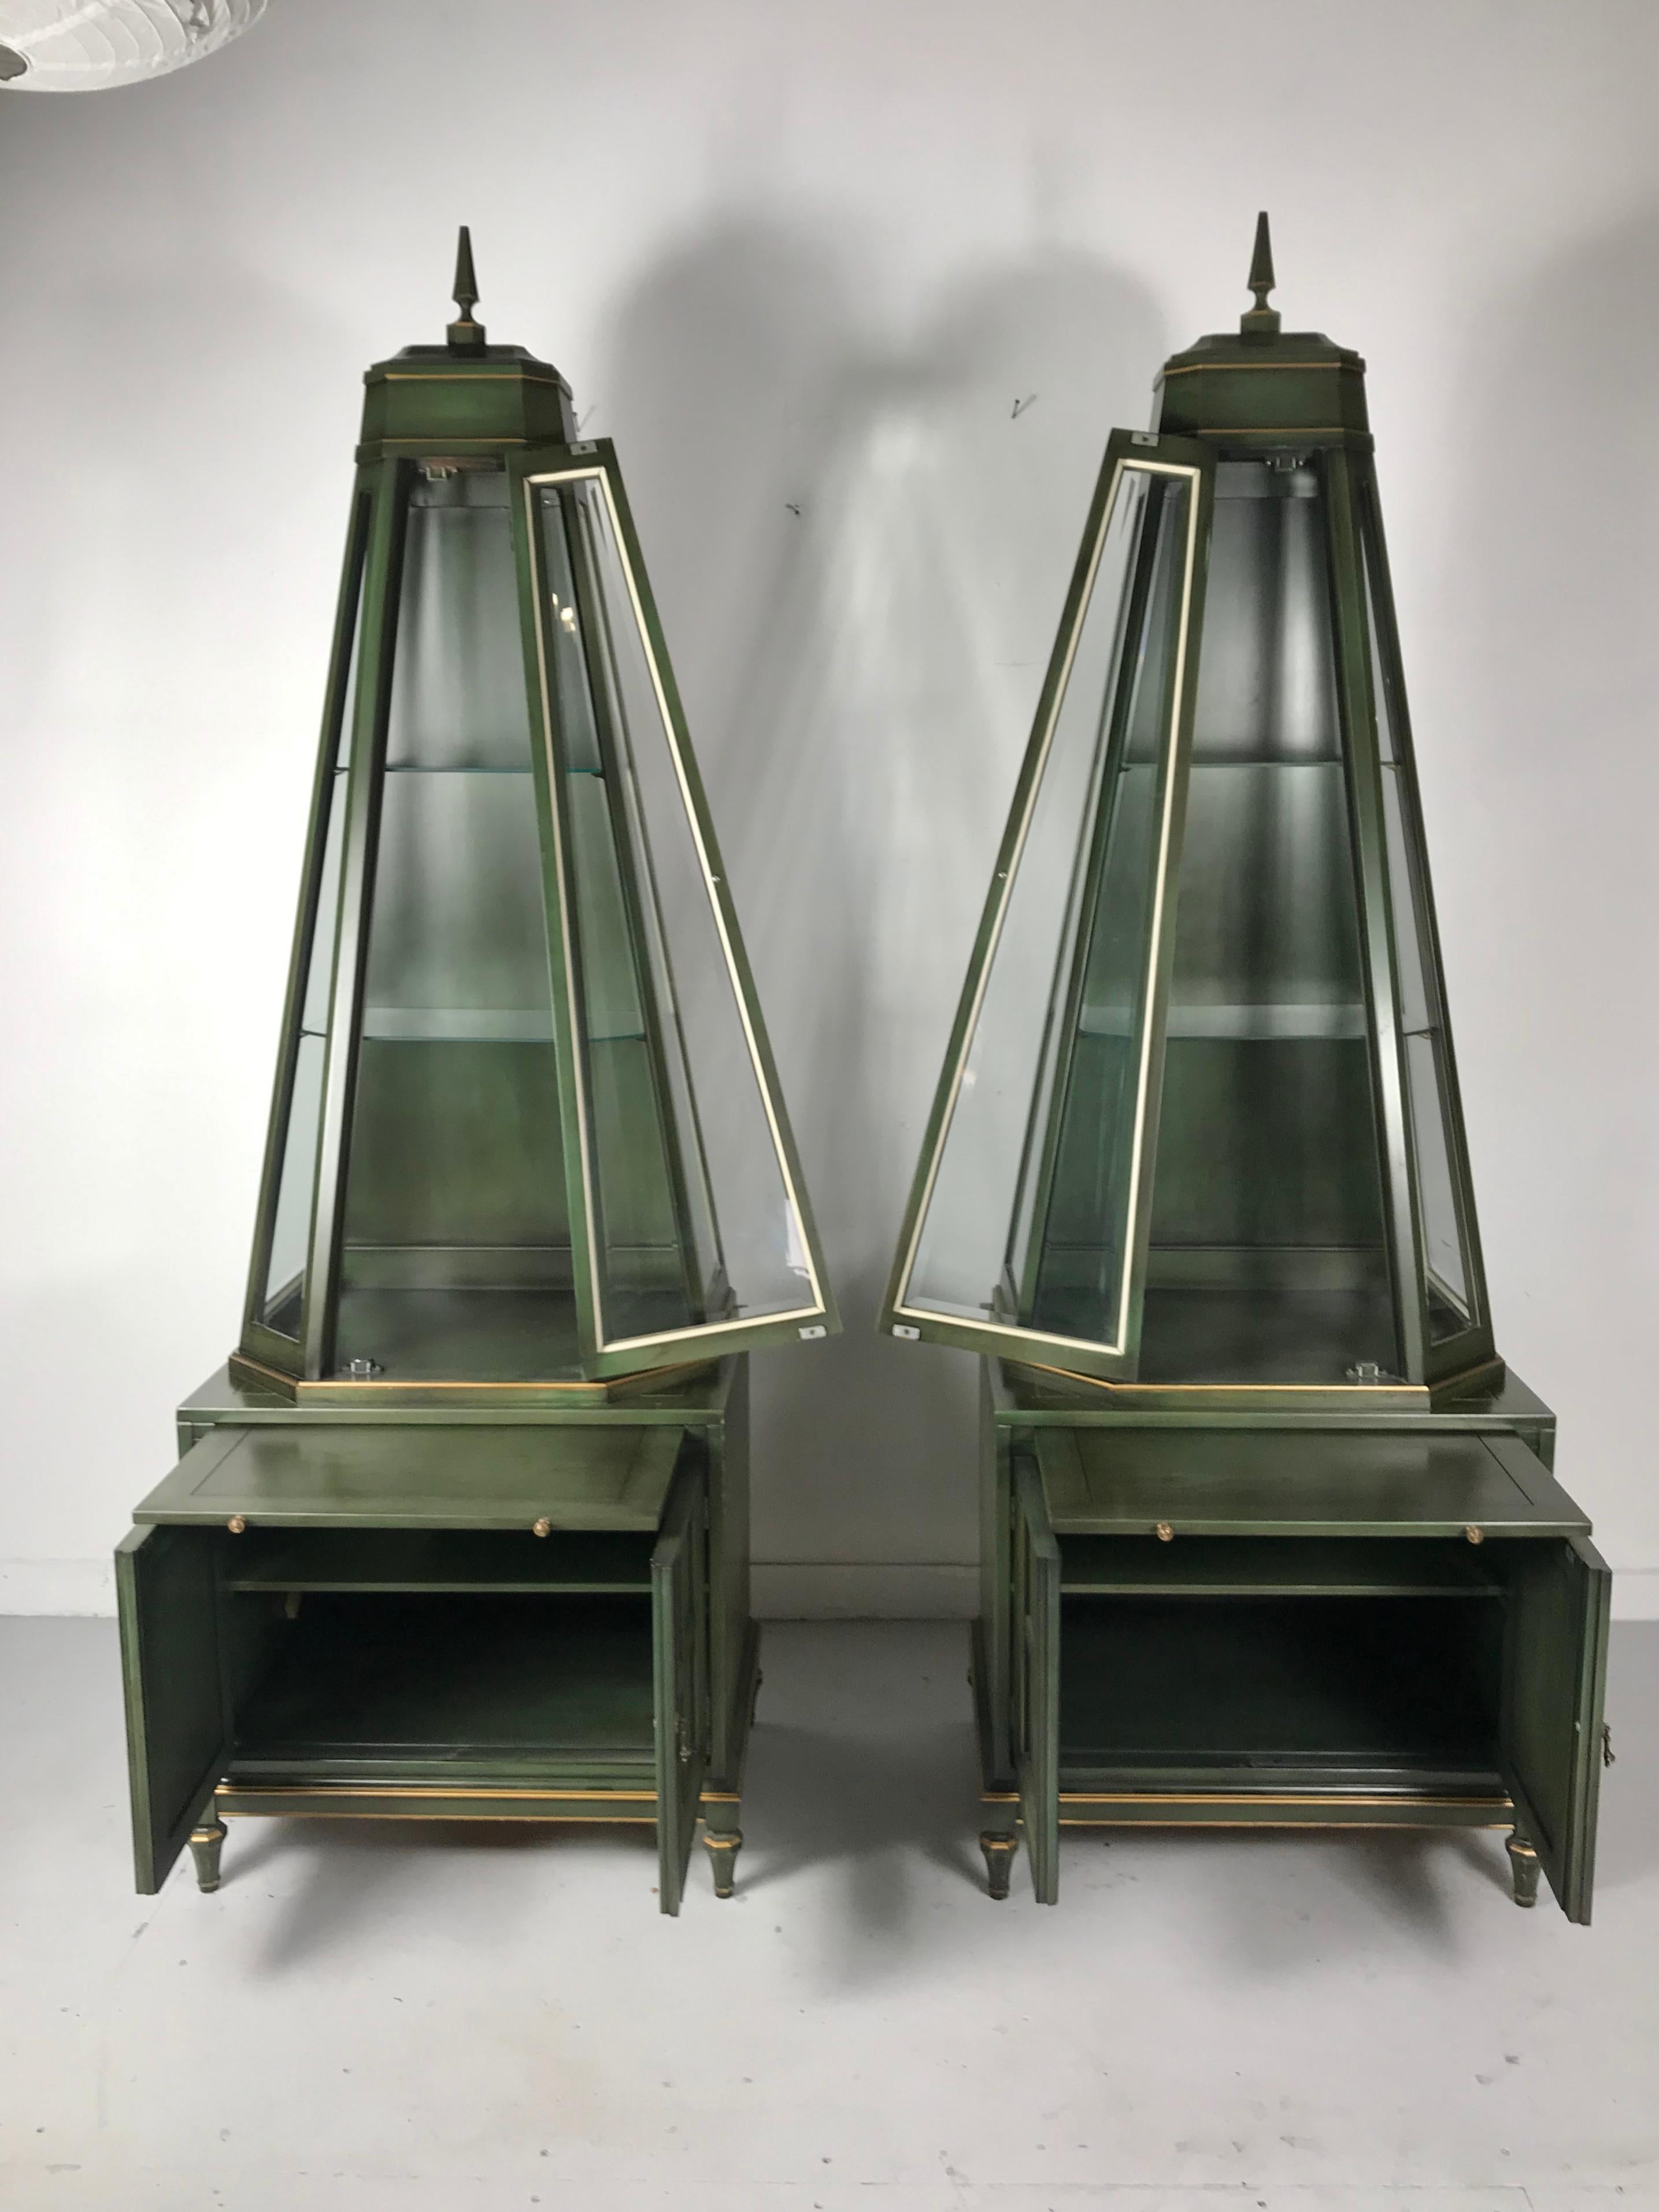 Mid-20th Century Unusual Pair of Decorative Pyramidal Curio Cabinets, Vitrines by Union National